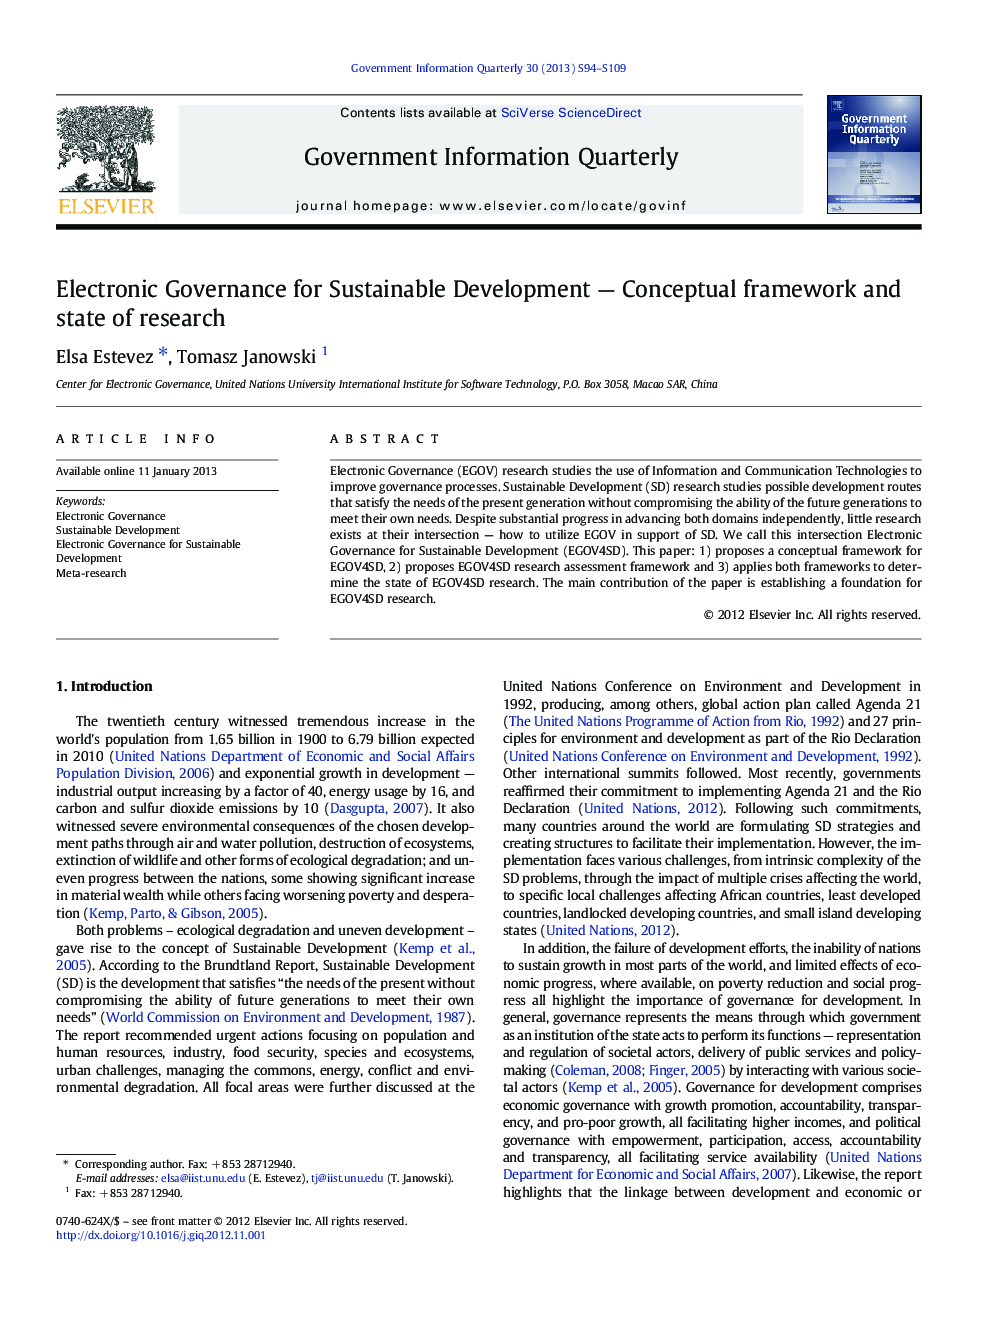 Electronic Governance for Sustainable Development — Conceptual framework and state of research